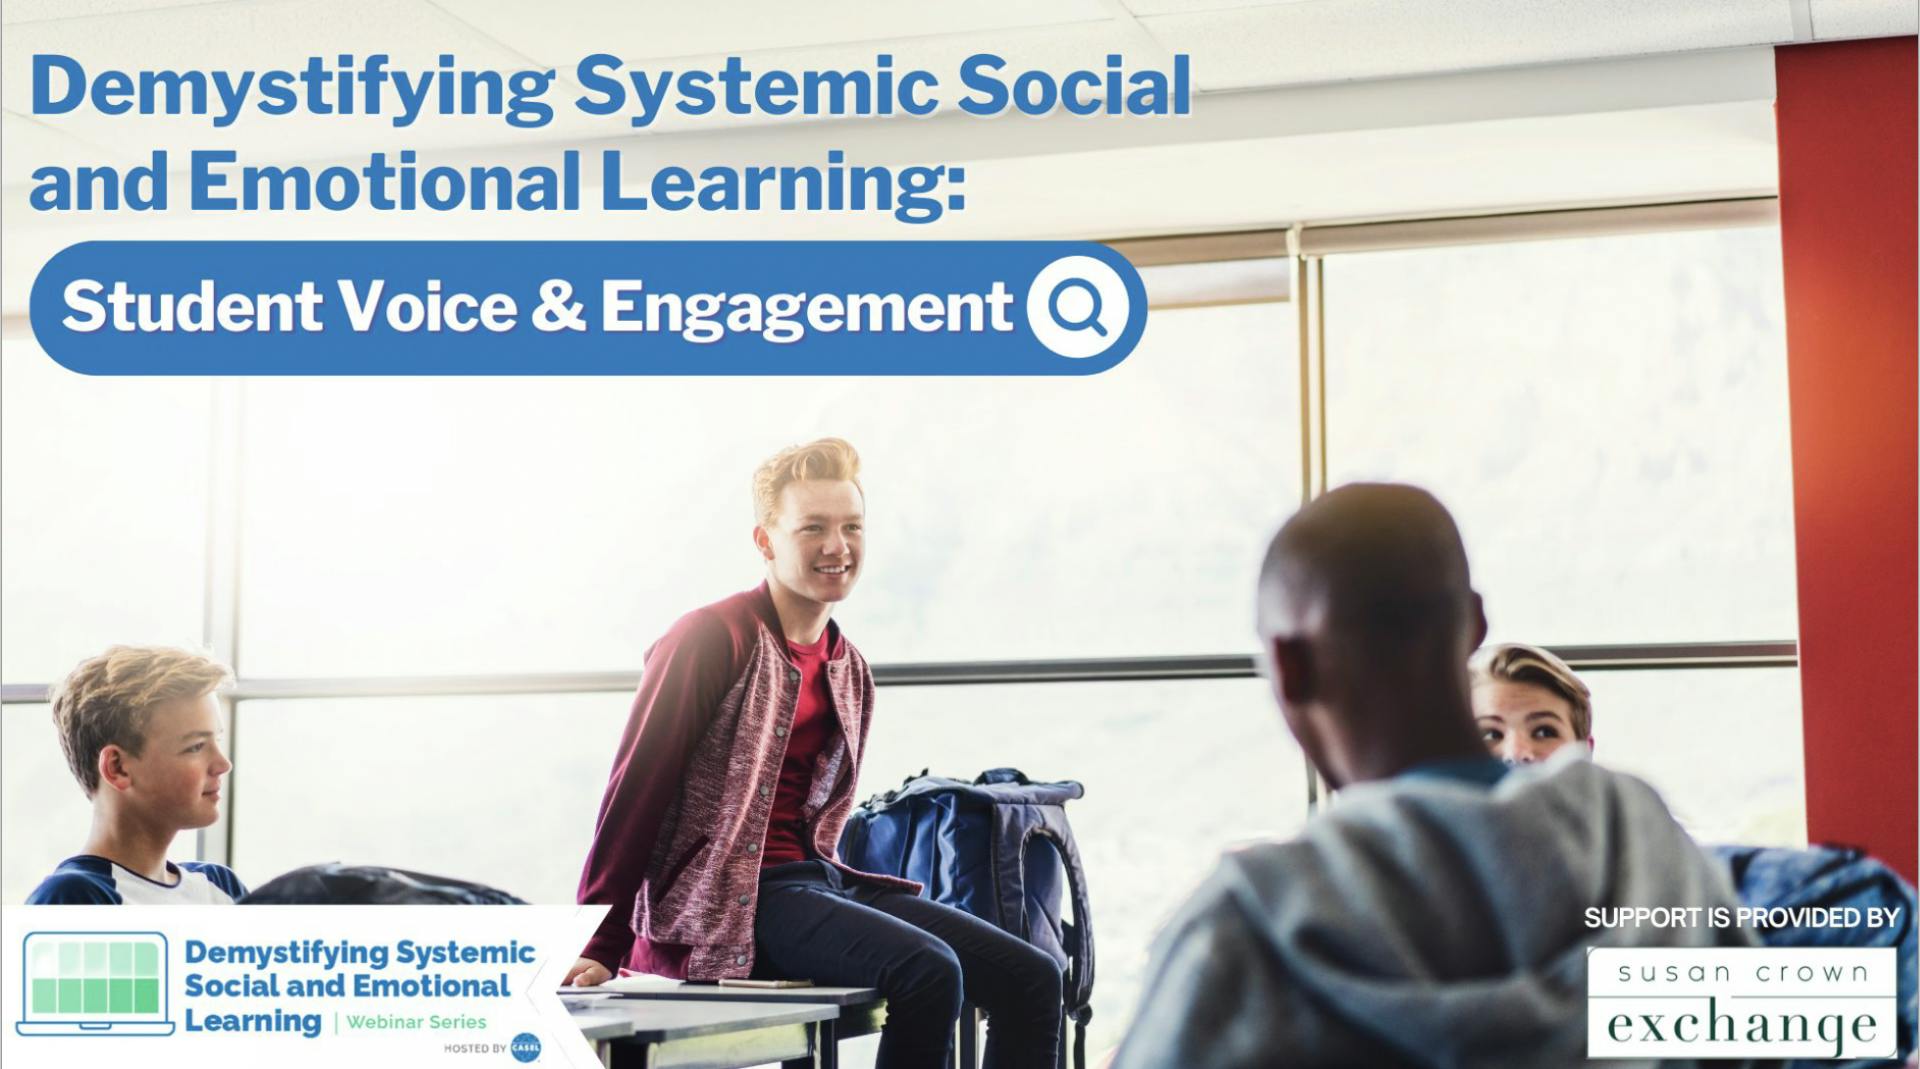 Demystifying Systemic Social and Emotional Learning: Student Voice